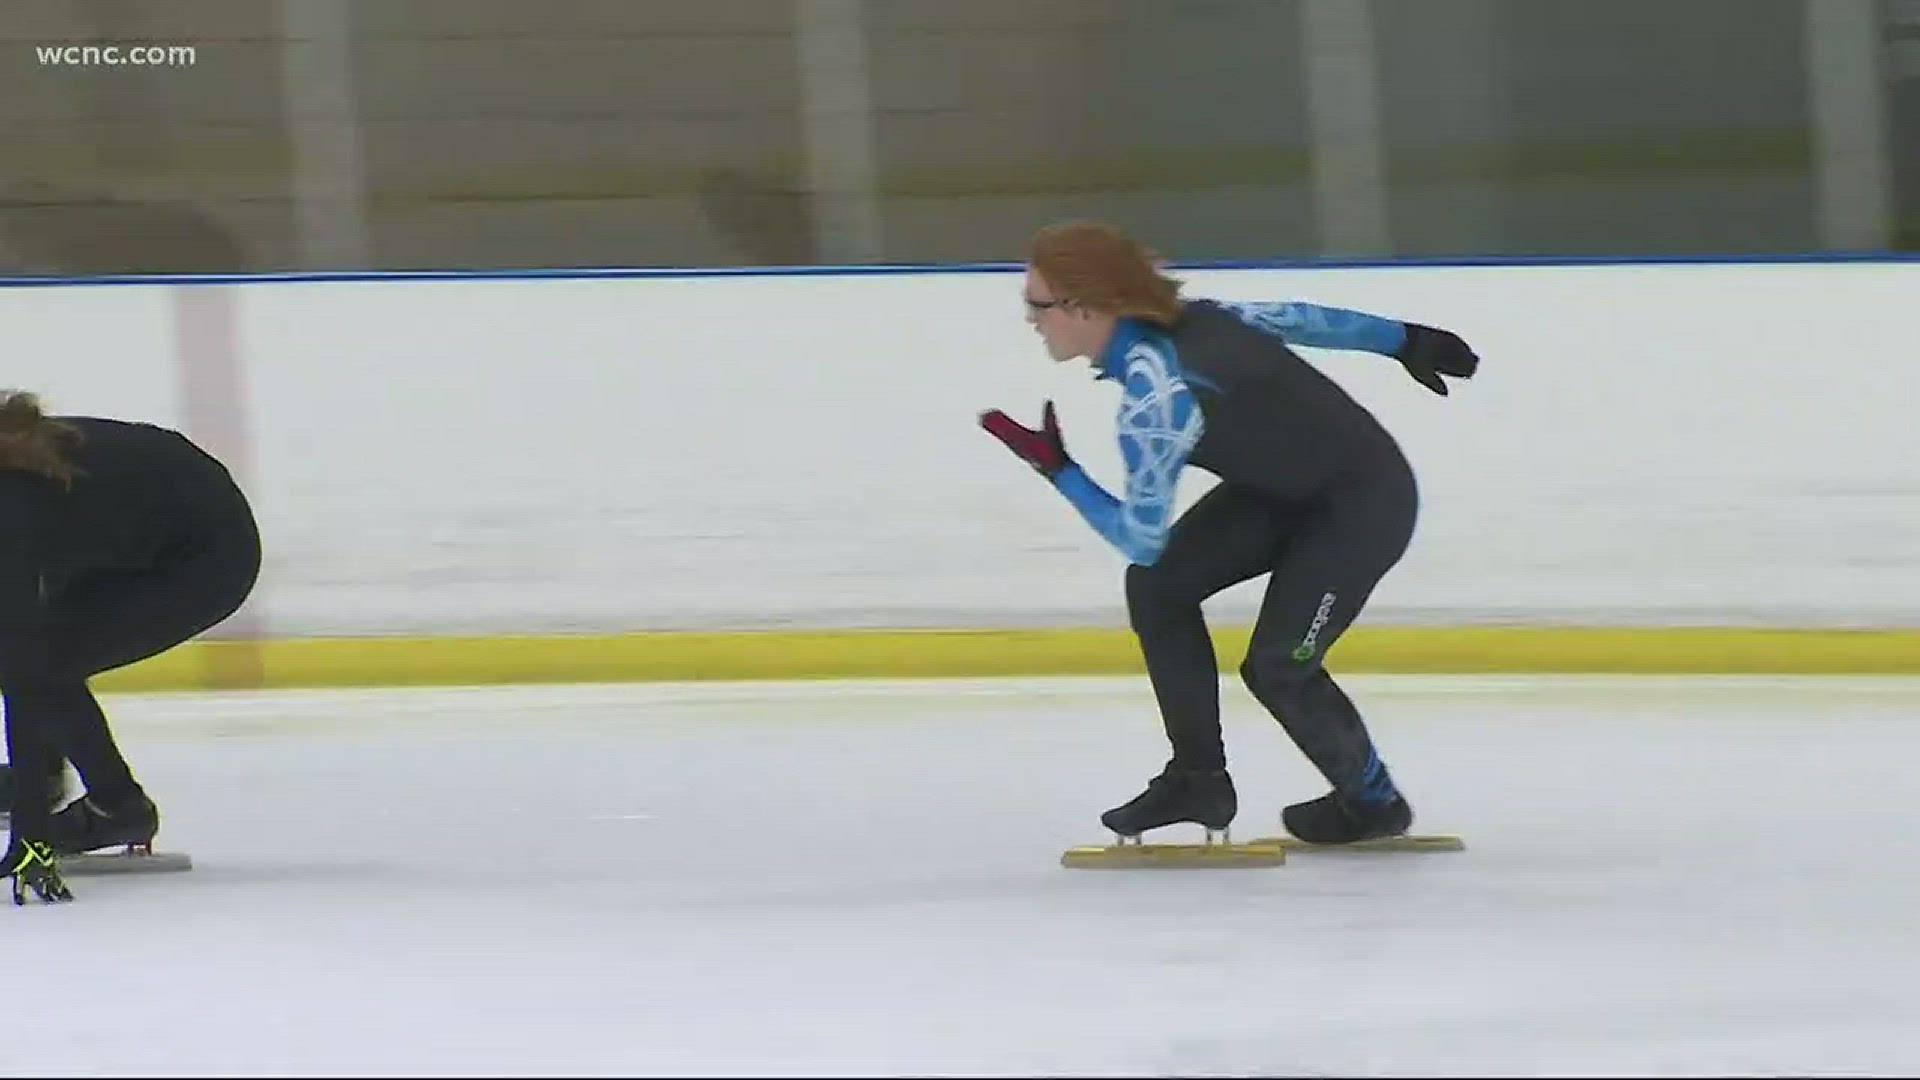 These figure skaters and speed skaters are gold medal winners for sure.